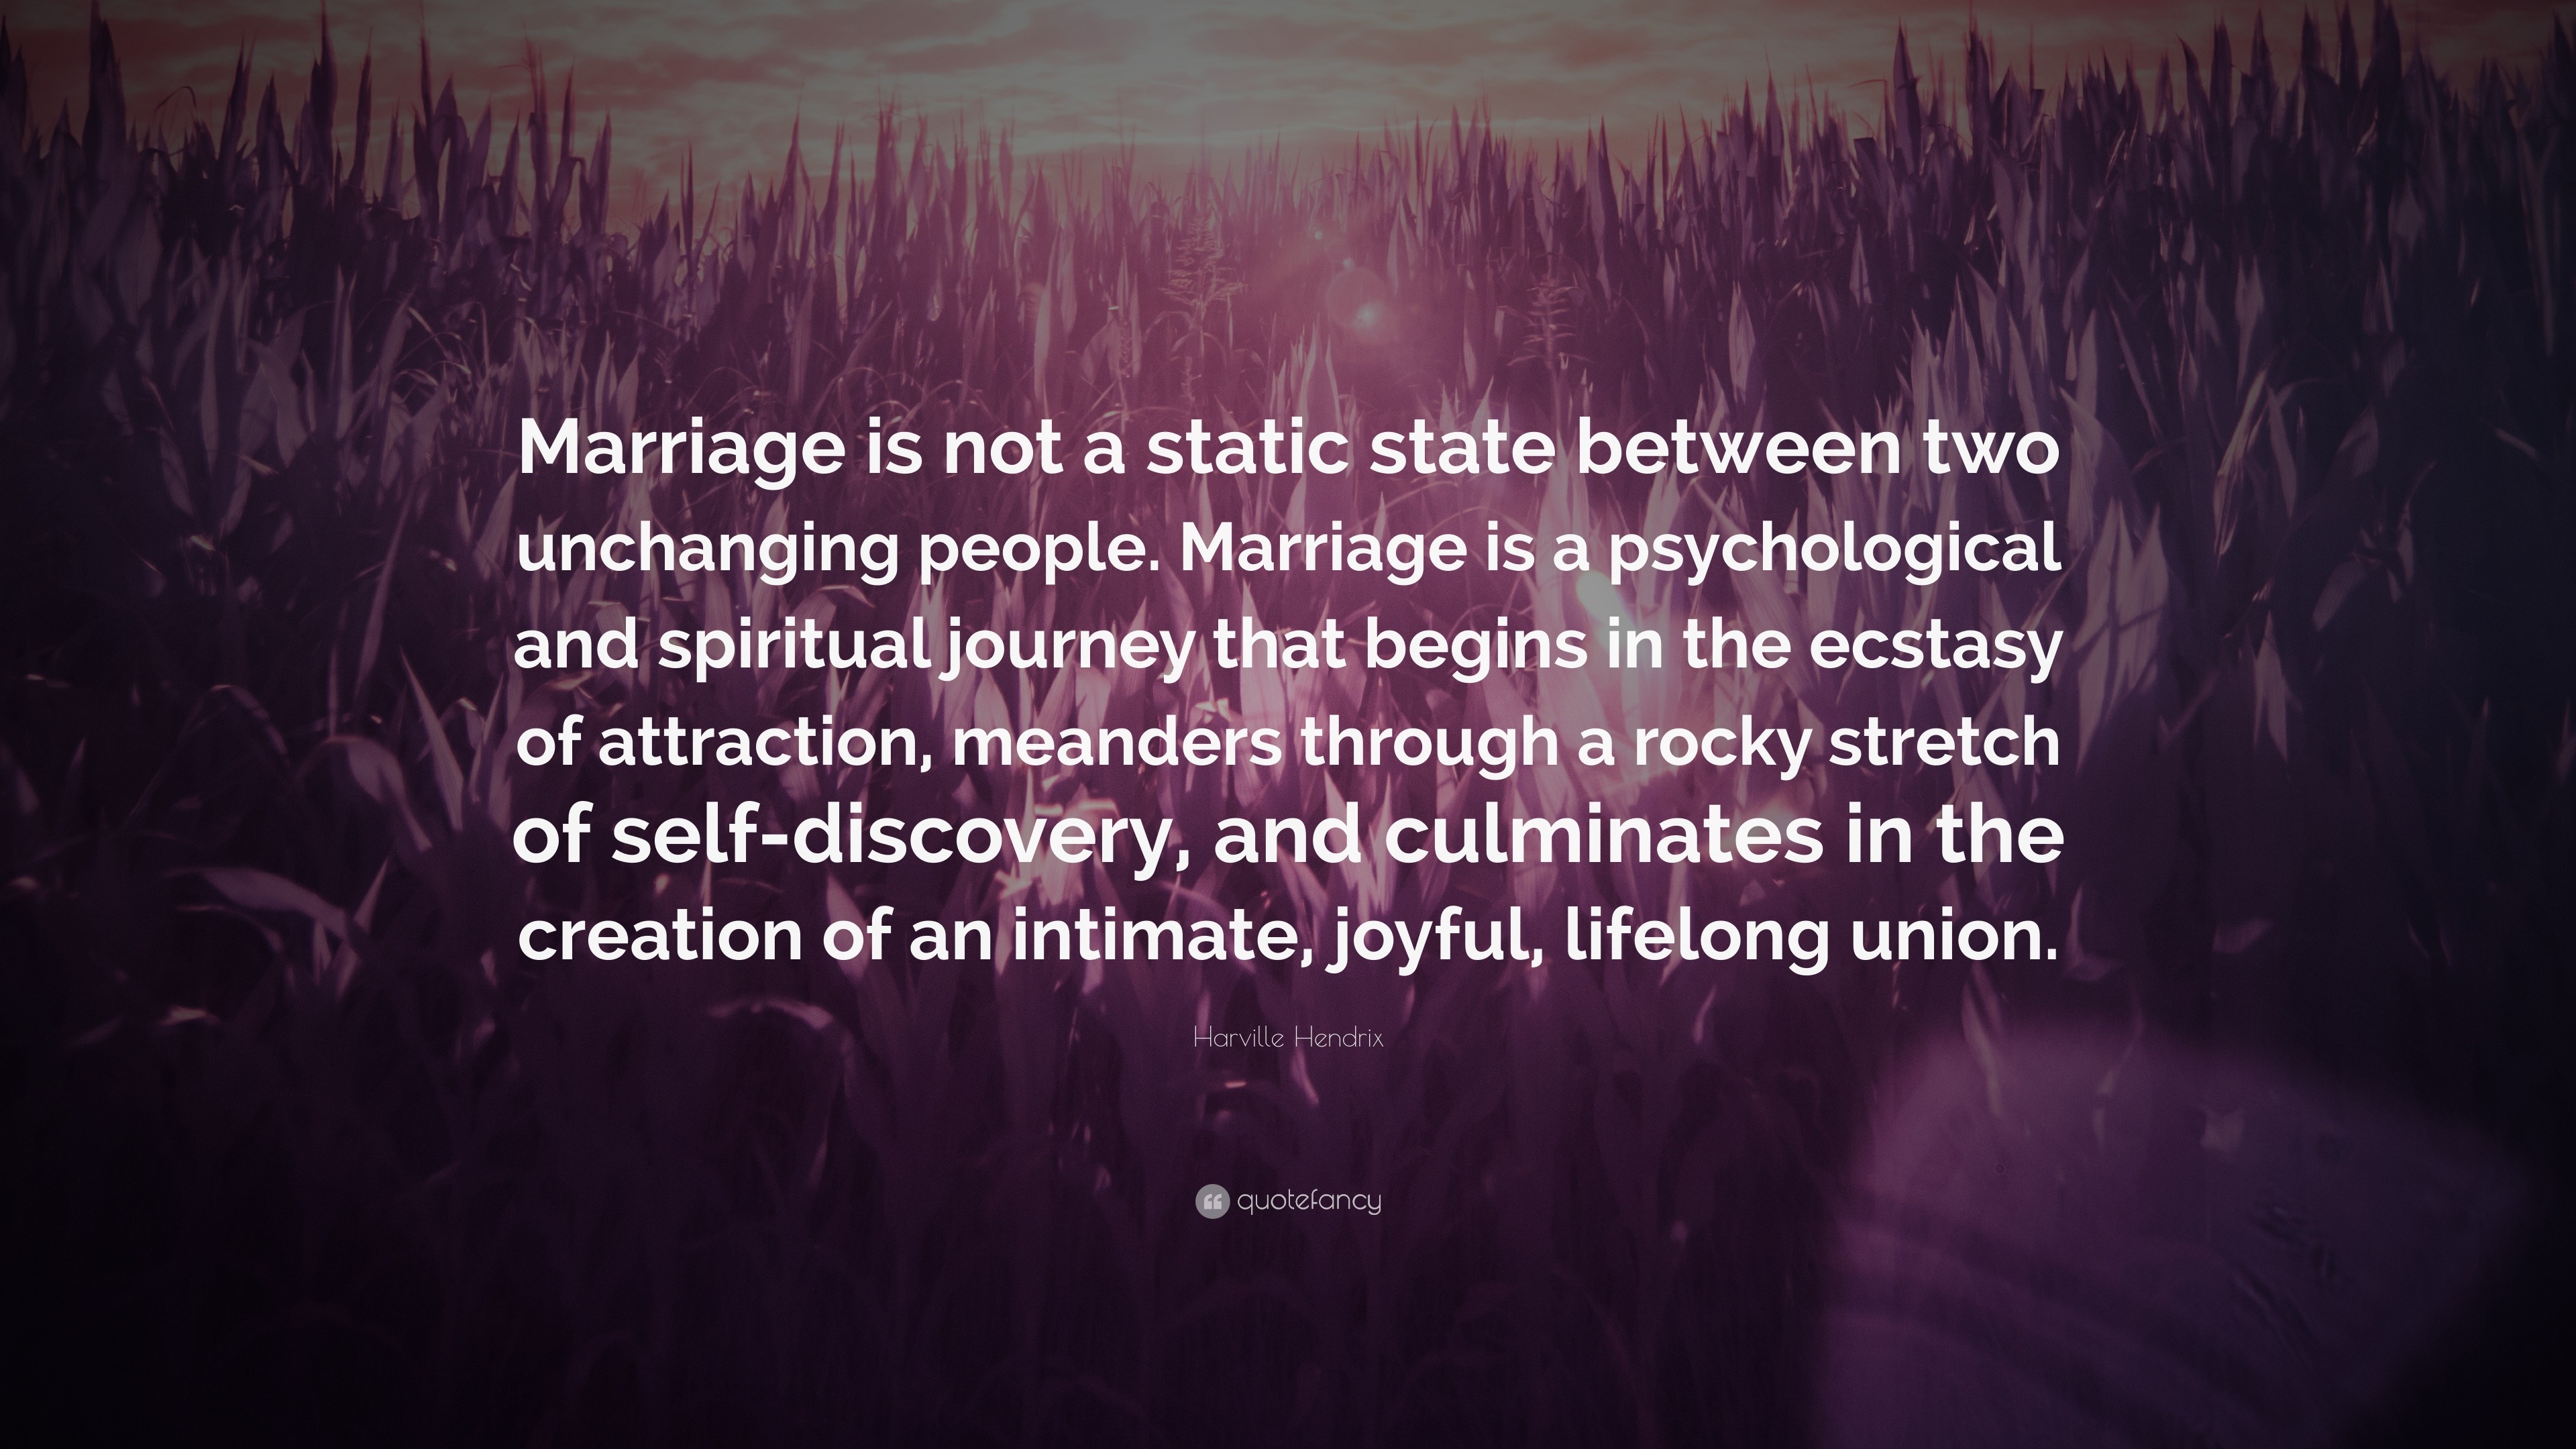 Harville Hendrix Quote: “Marriage is not a static state ...